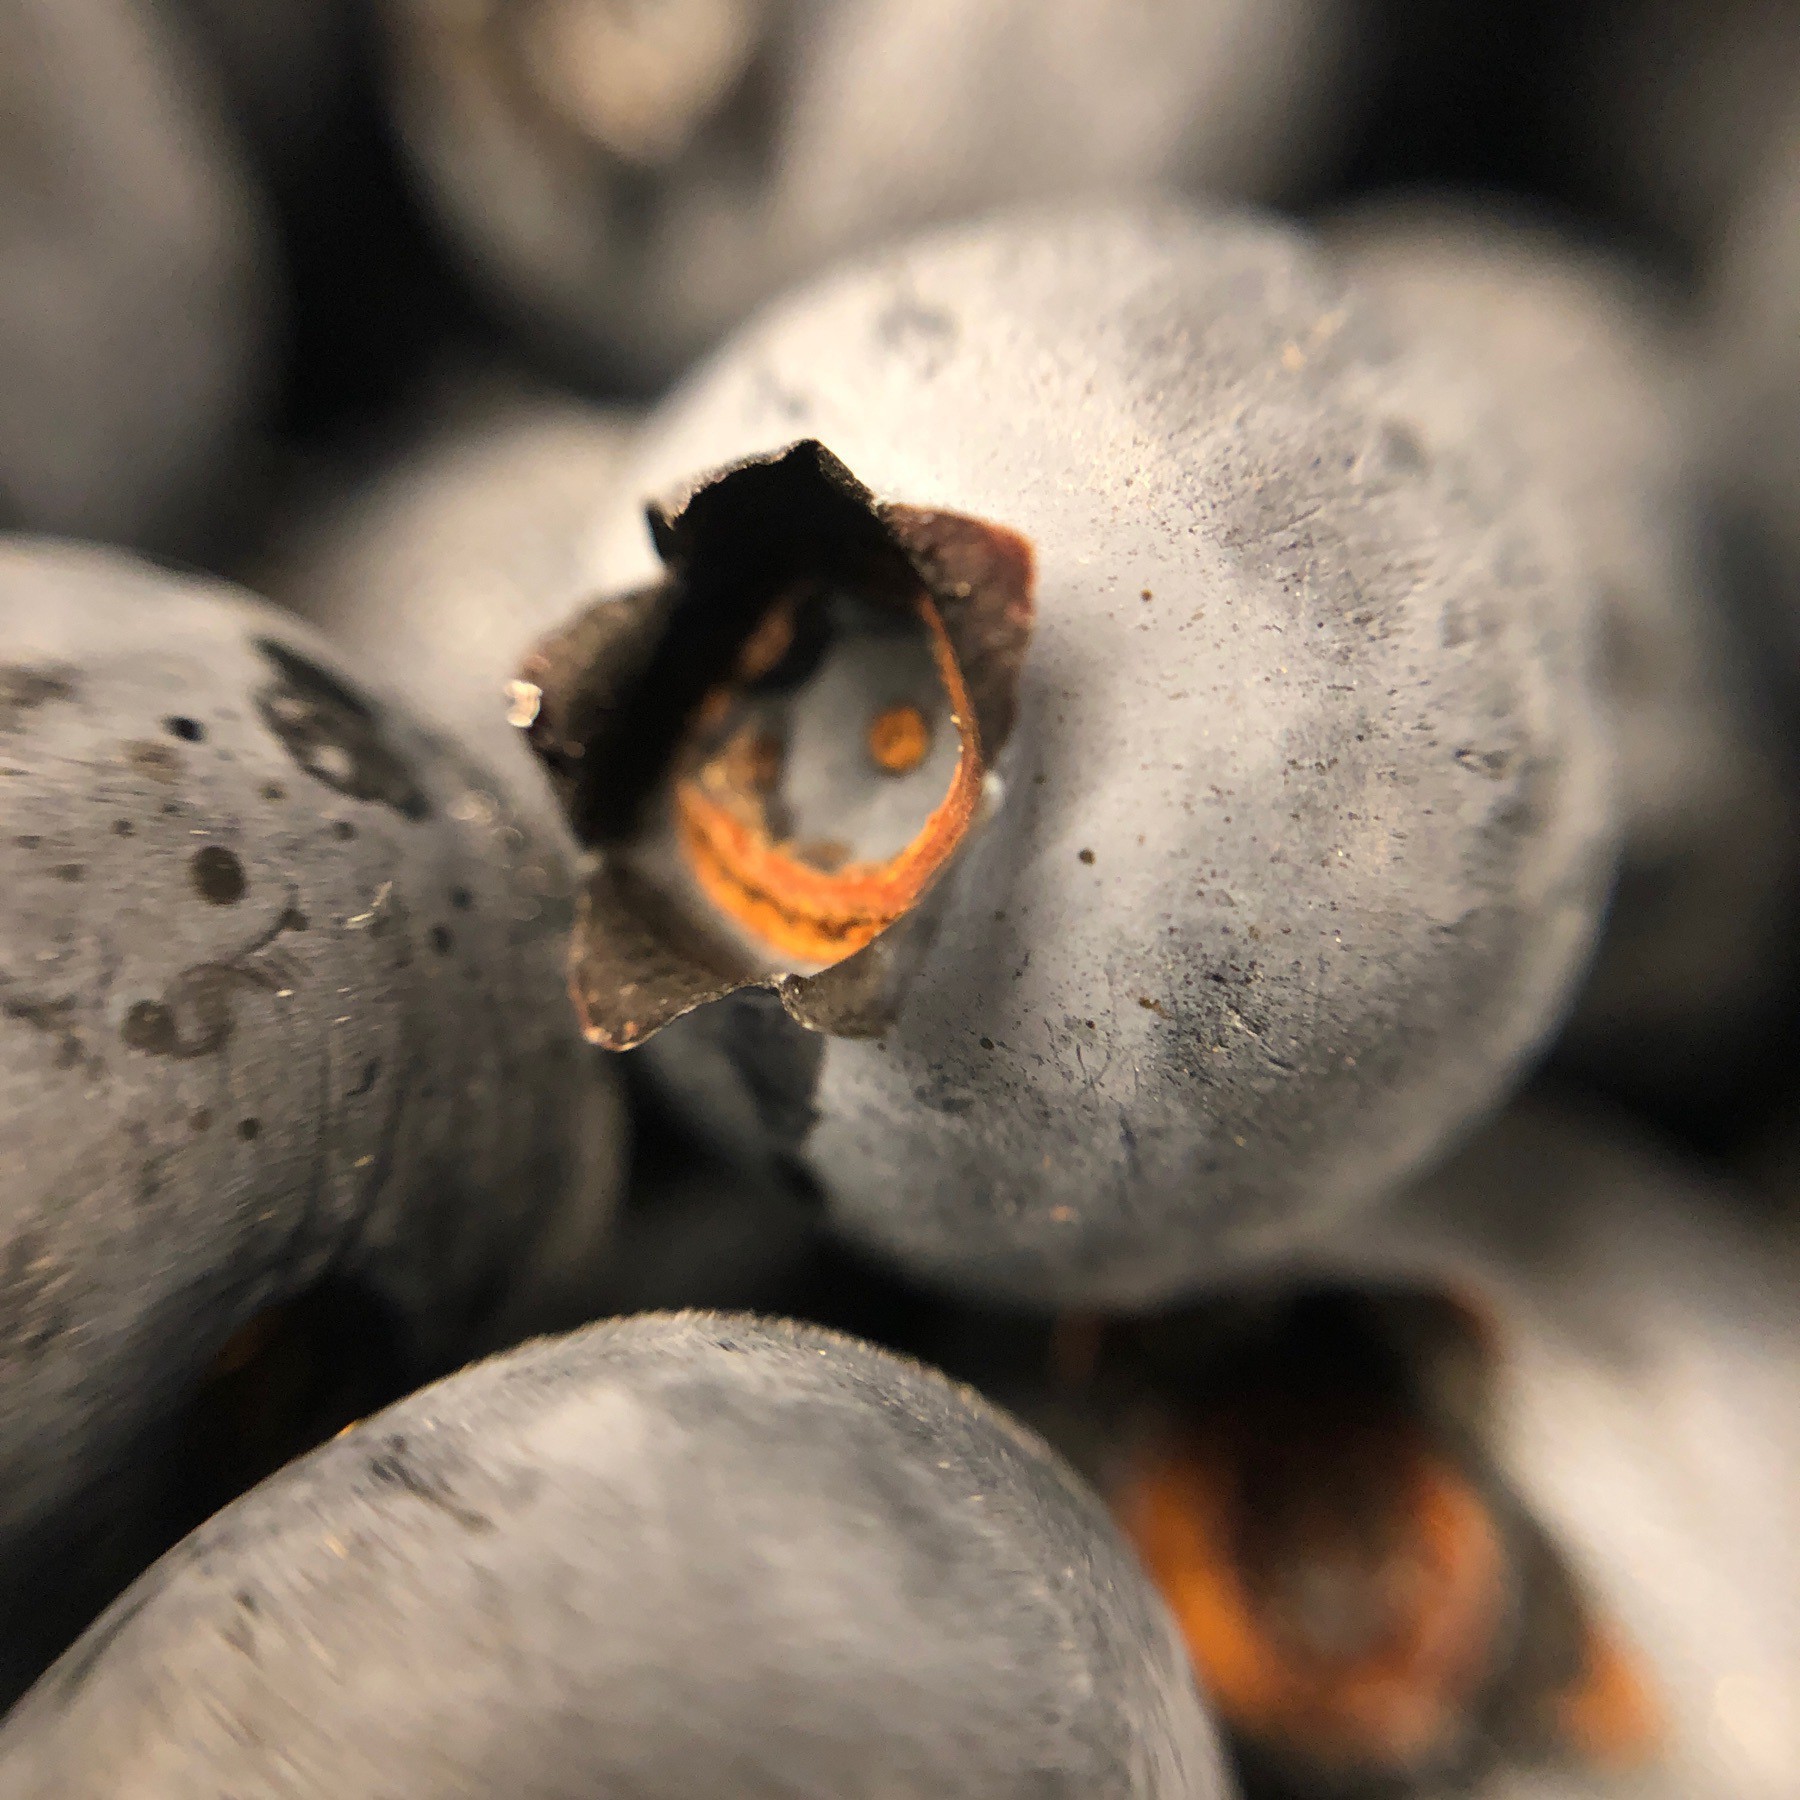 Close up of blueberries.